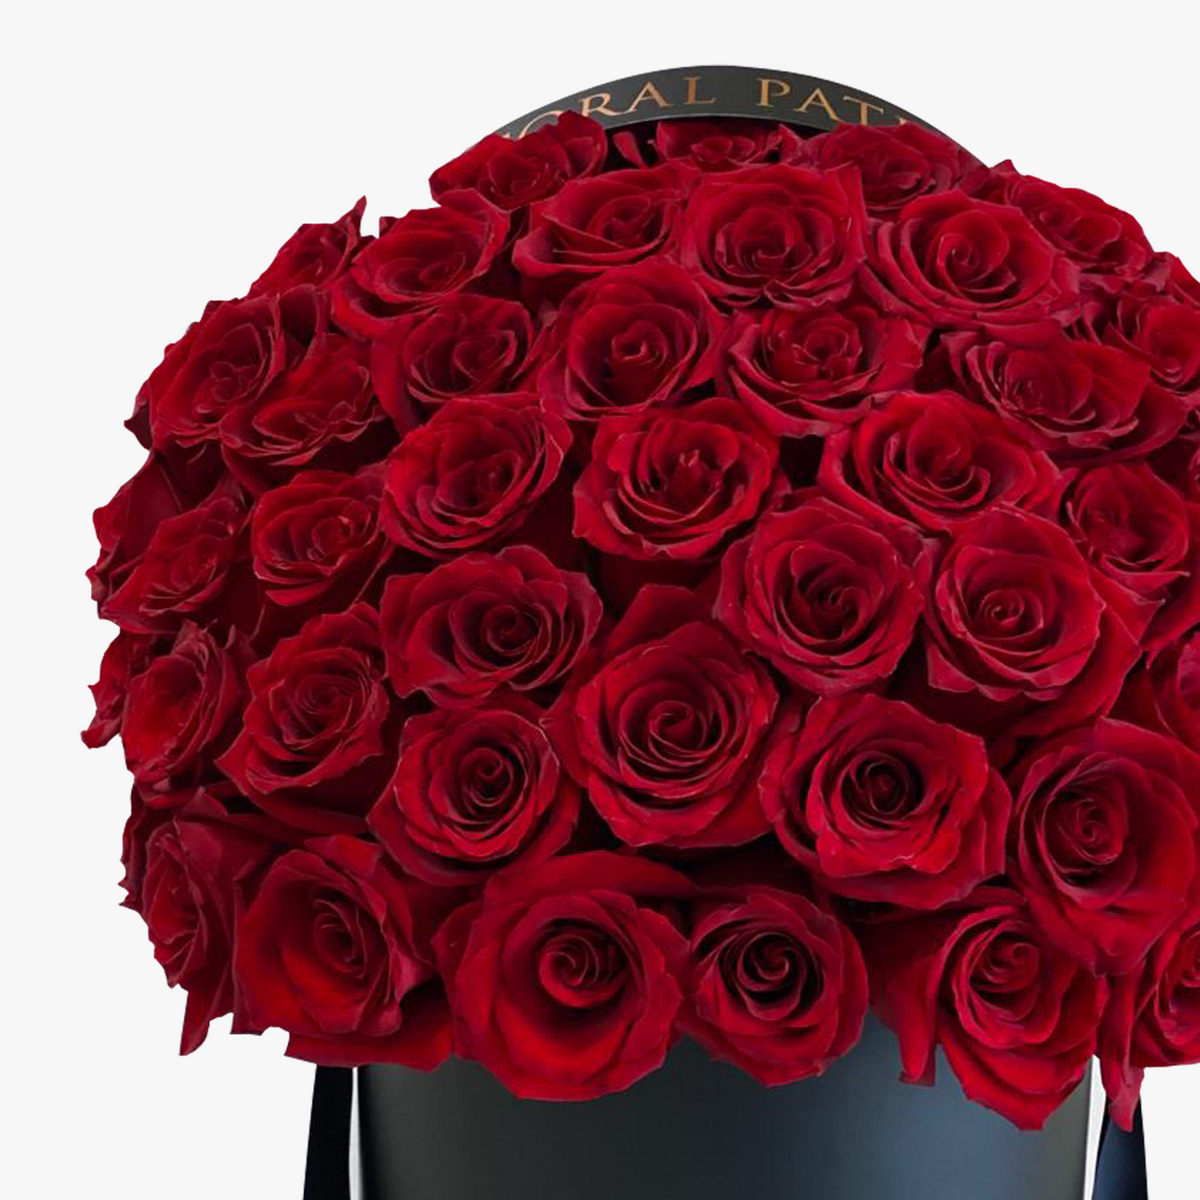 50 Red Roses in a Box